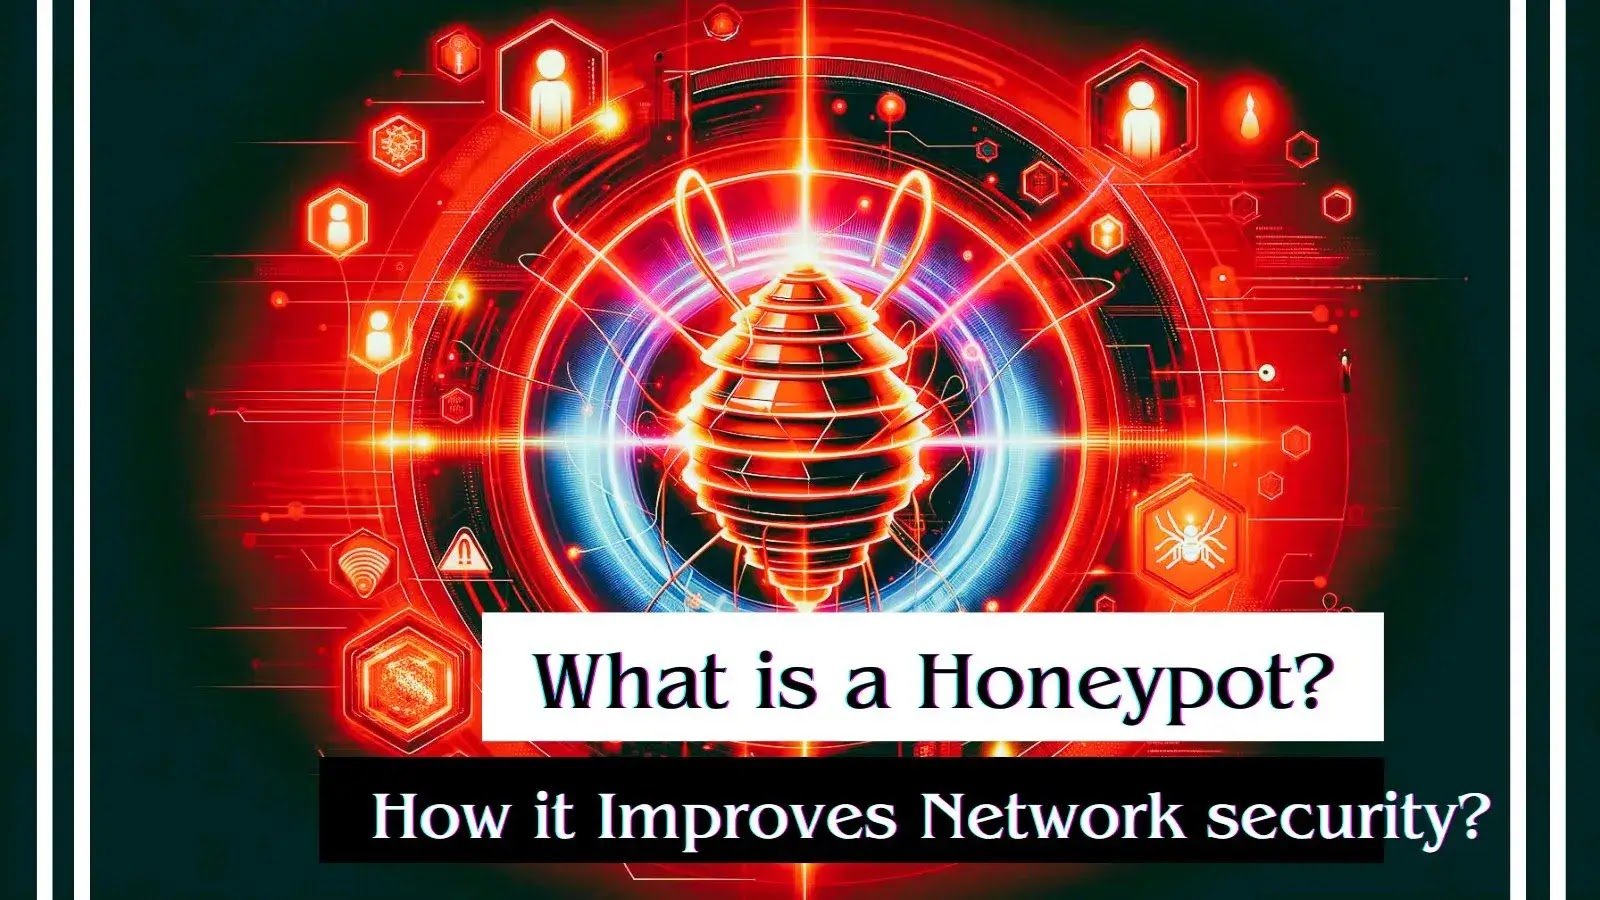 What is a Honeypot? How does it Improve Network security?